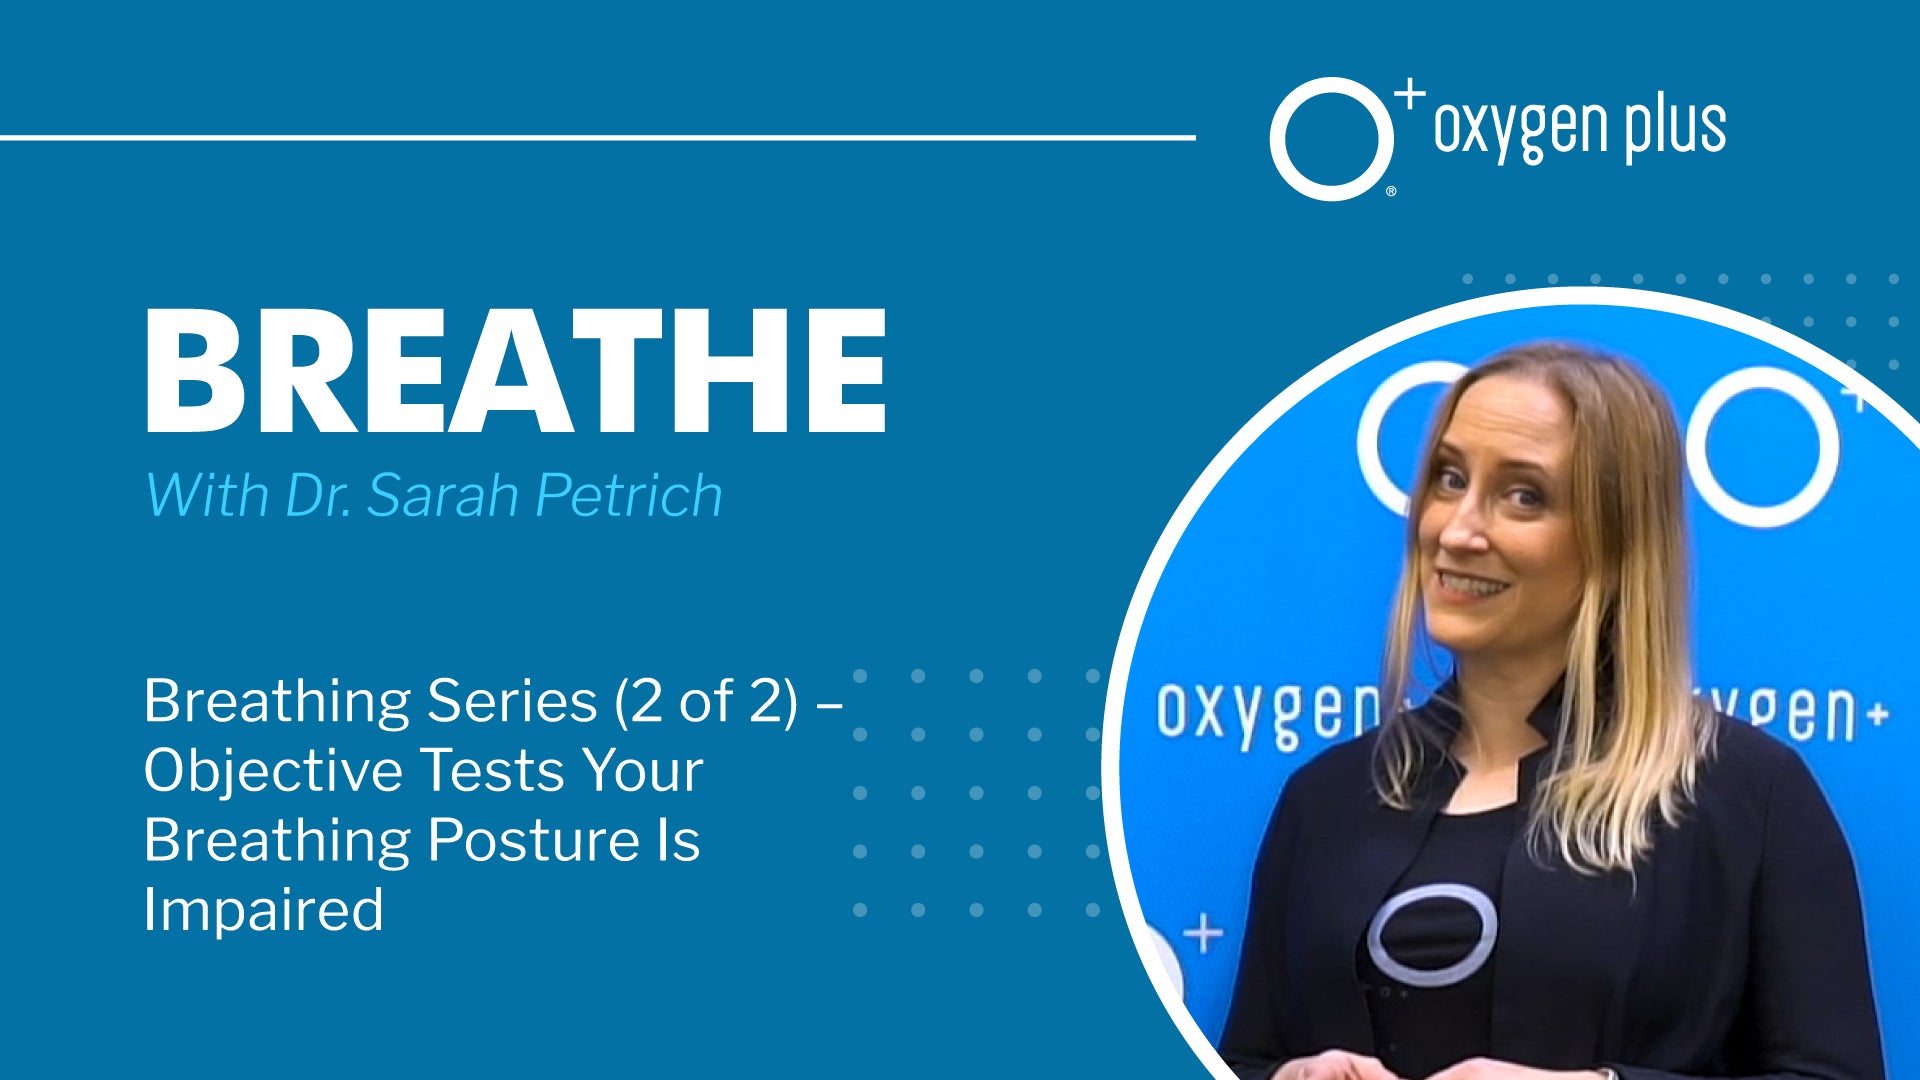 Breathing Series (2 of 2): “Objective Tests Your Breathing Posture Is Impaired” with Dr. Sarah Petrich